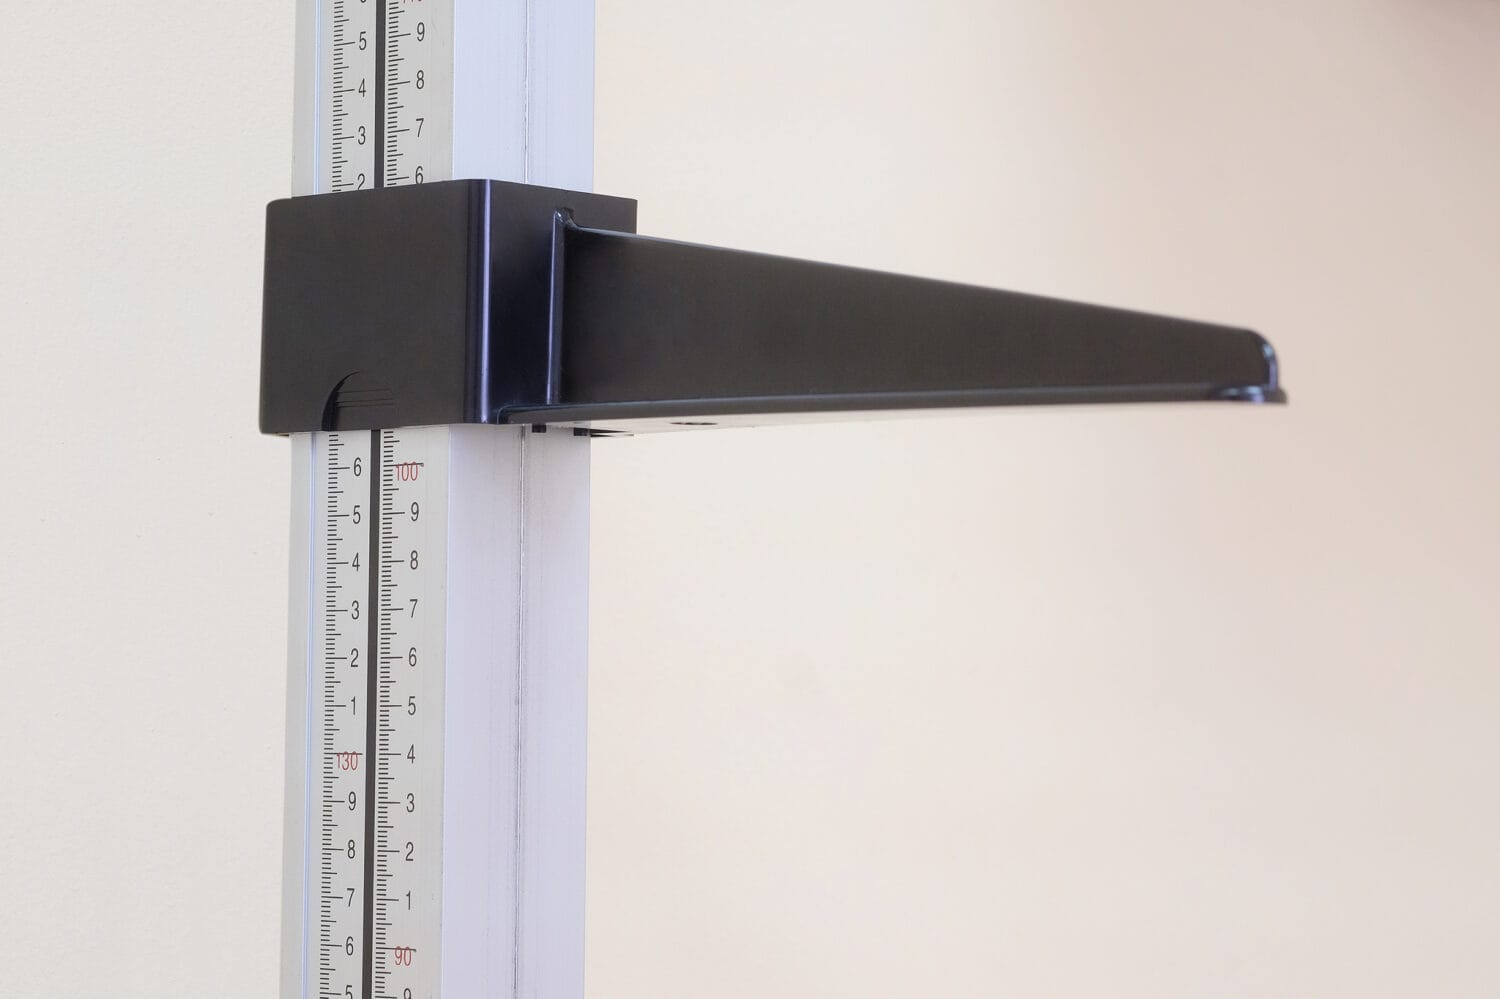 Closeup of a stadiometer, a human height measuring device